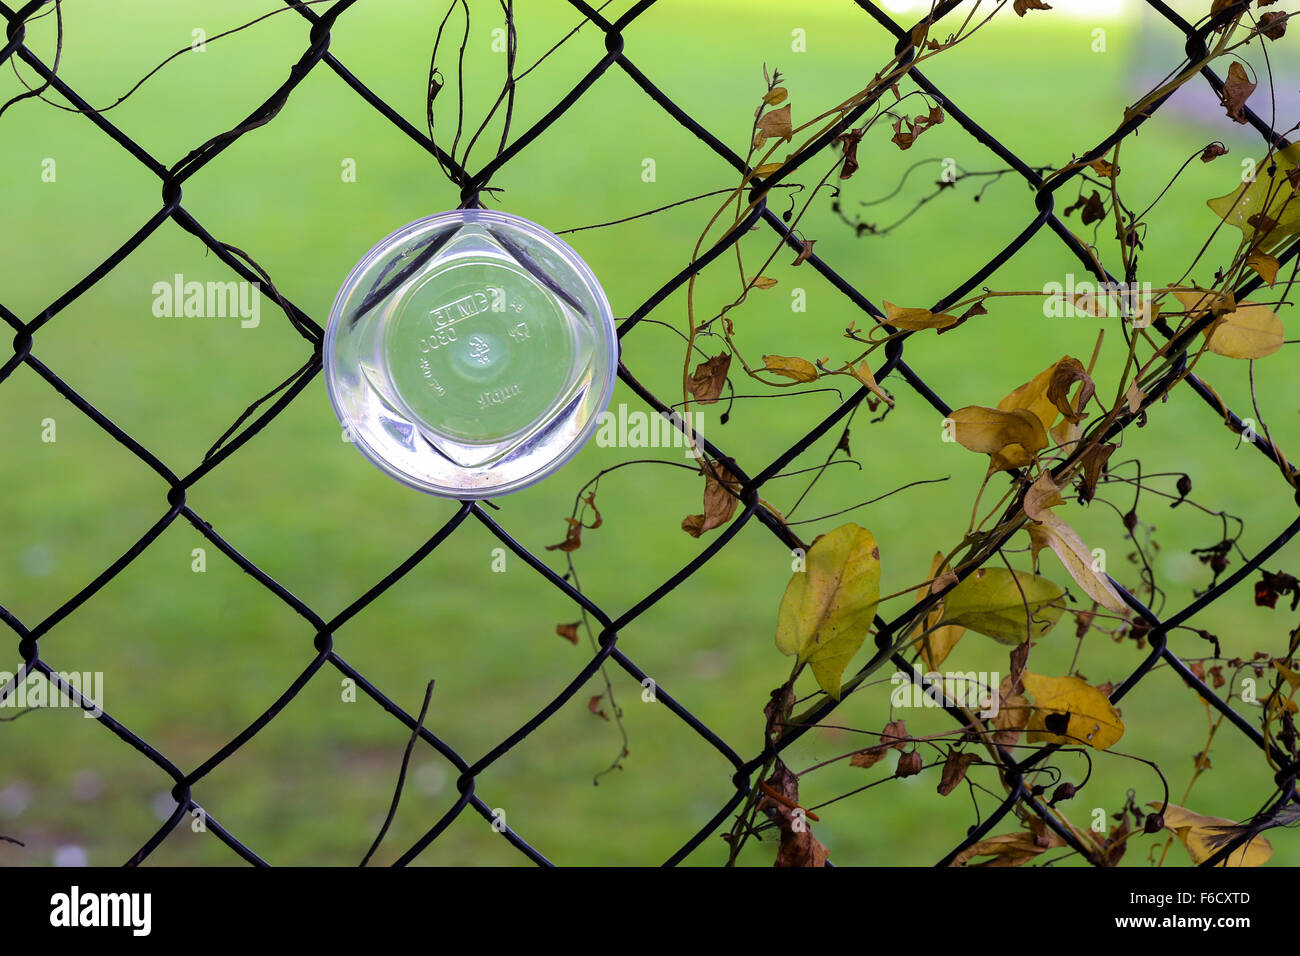 Plastic cups stuck in a chain link fence green grass background Stock Photo